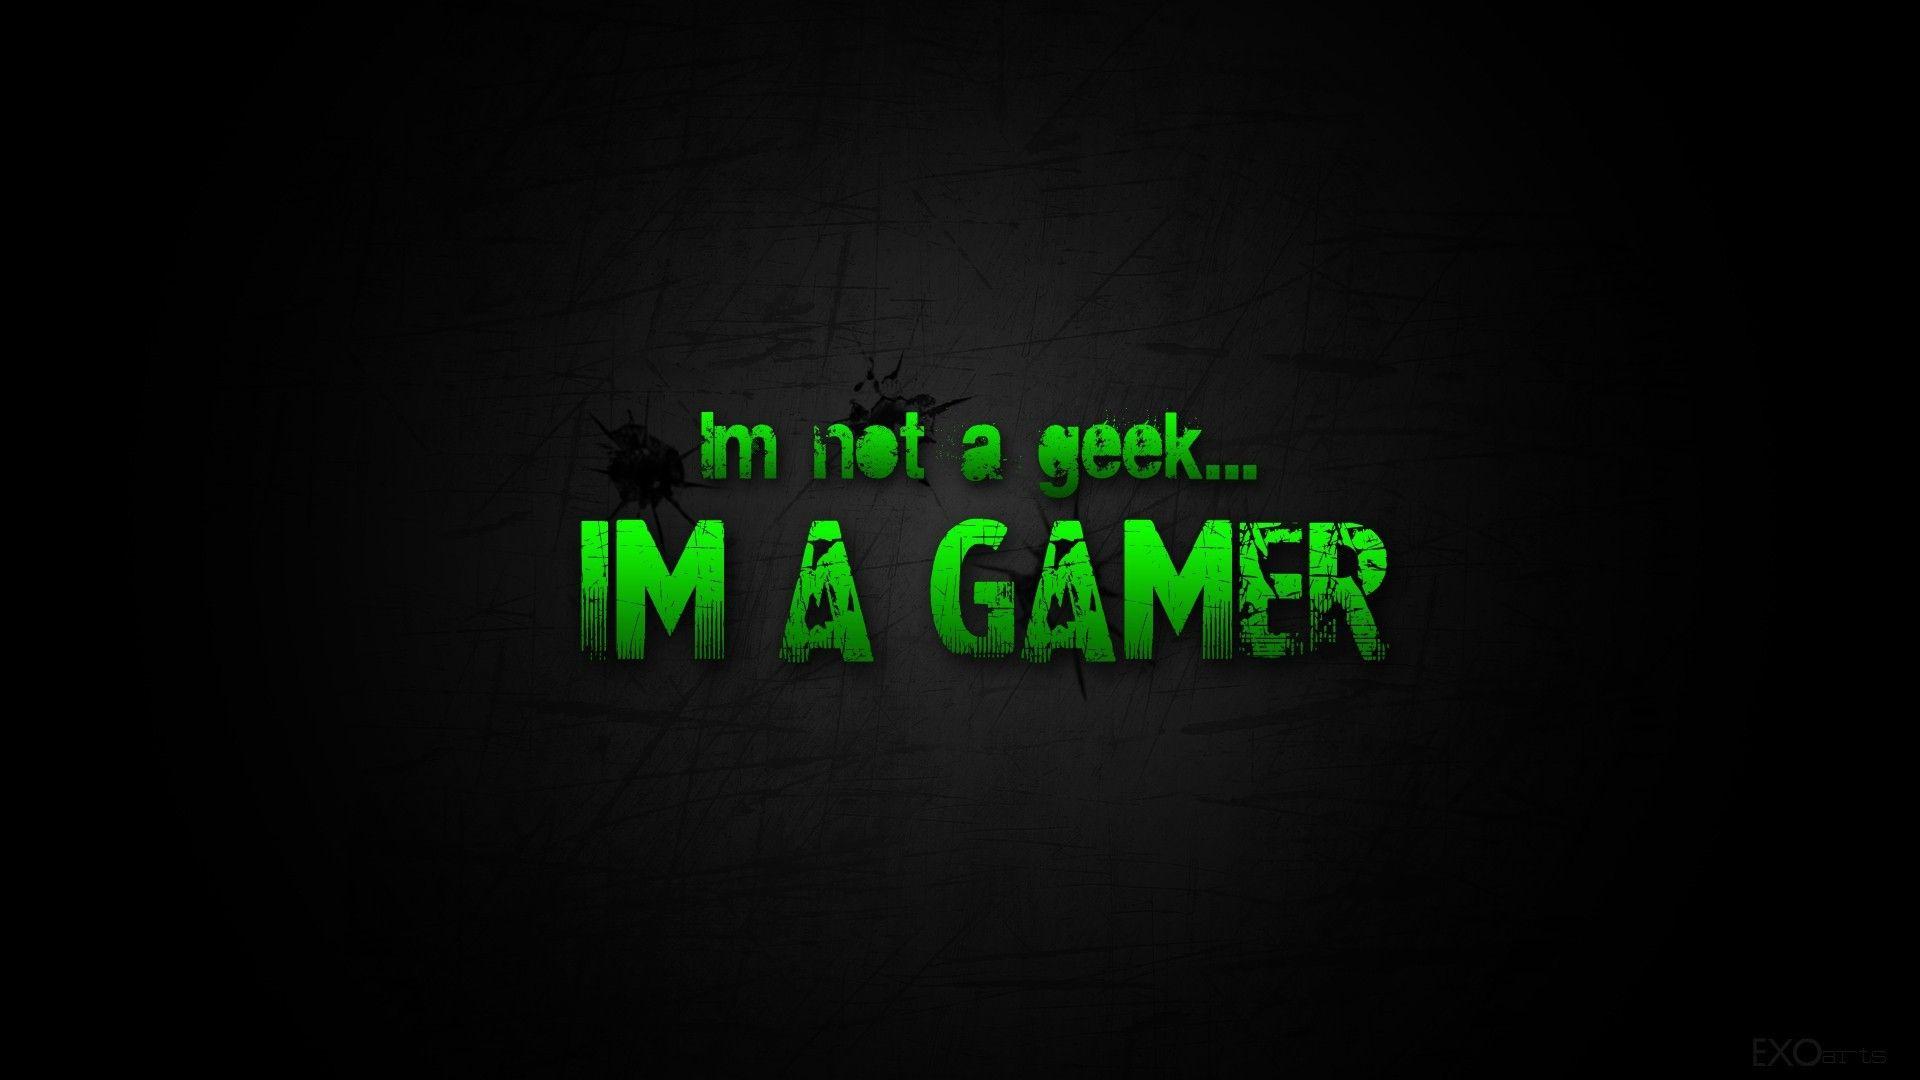 I'm not a geek, I'm a gamer wallpaper and image